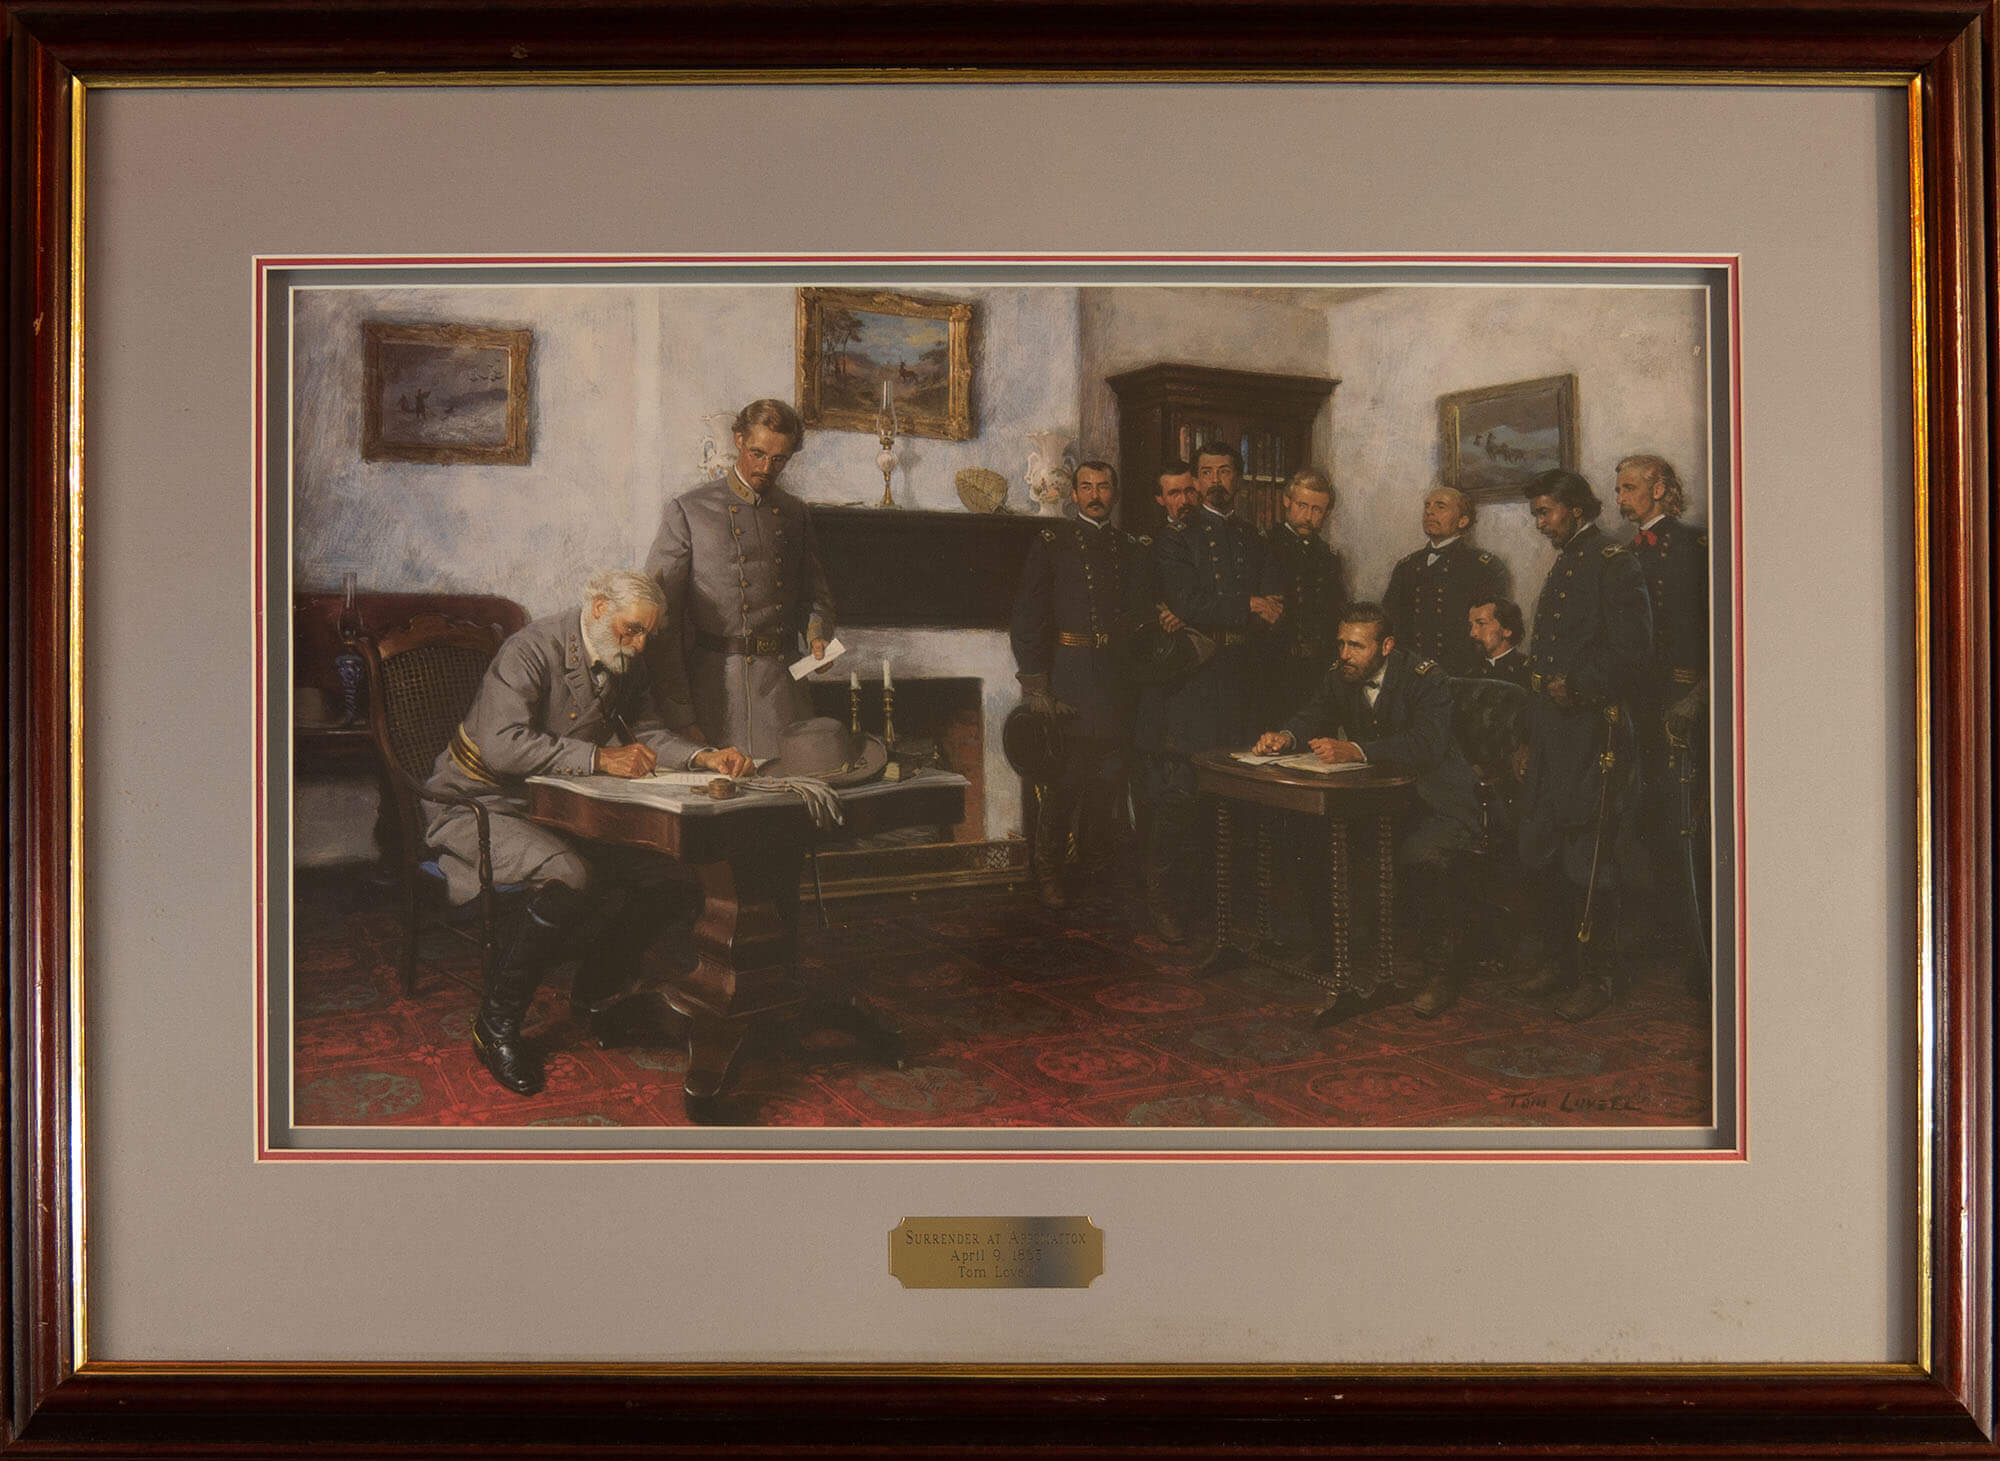 surrender-at-appomattox-by-tom-lovell